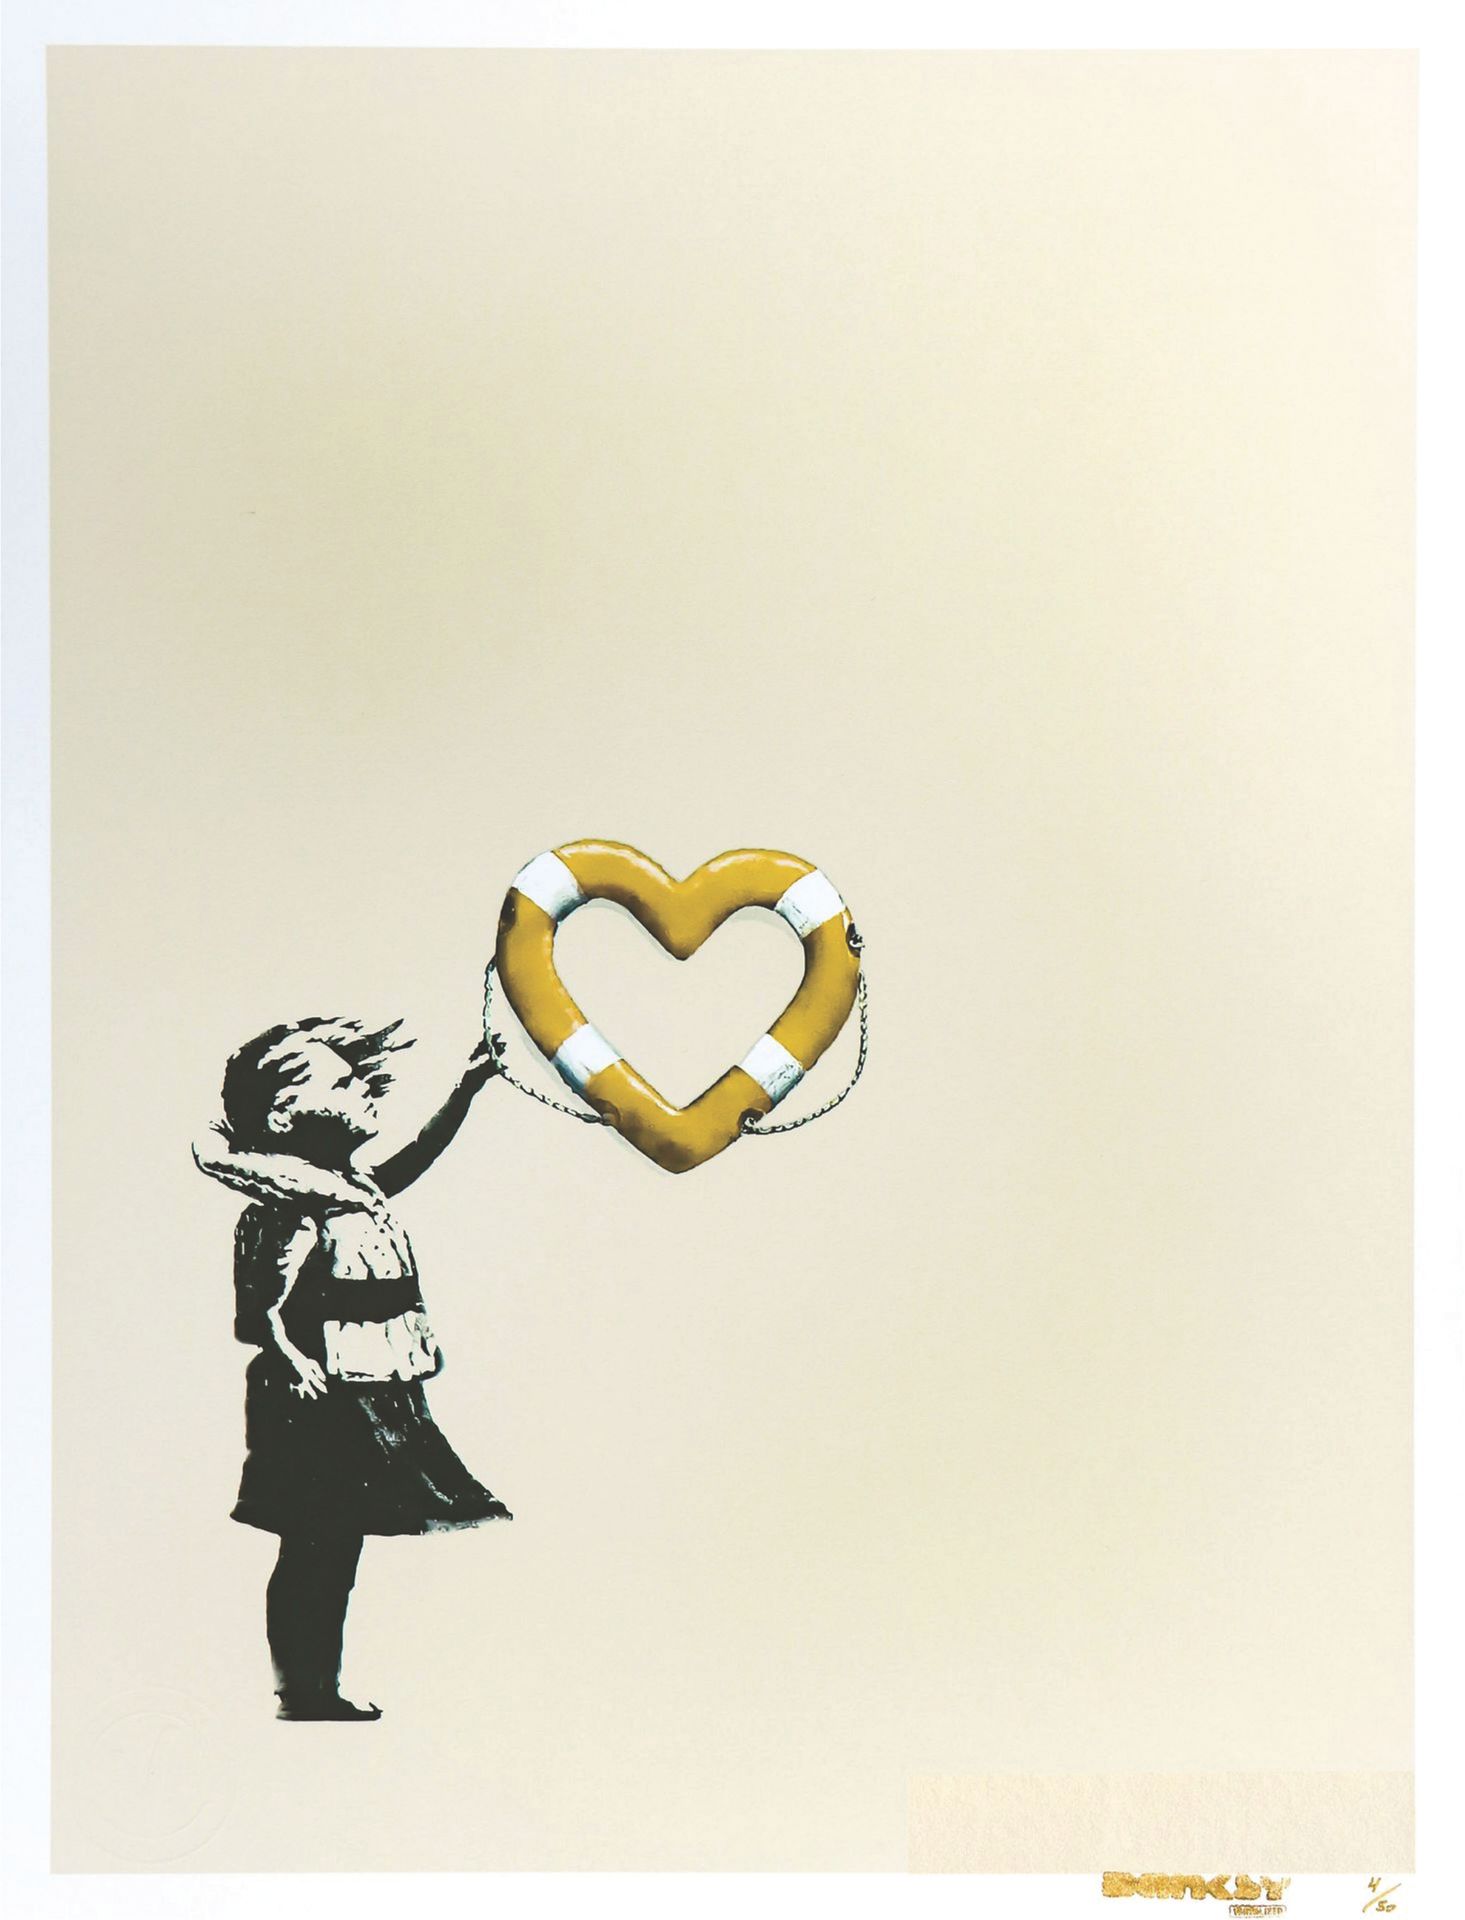 Null BANKSY (1974), d'après x Post Modern Vandal

Girl with heart shaped float

&hellip;